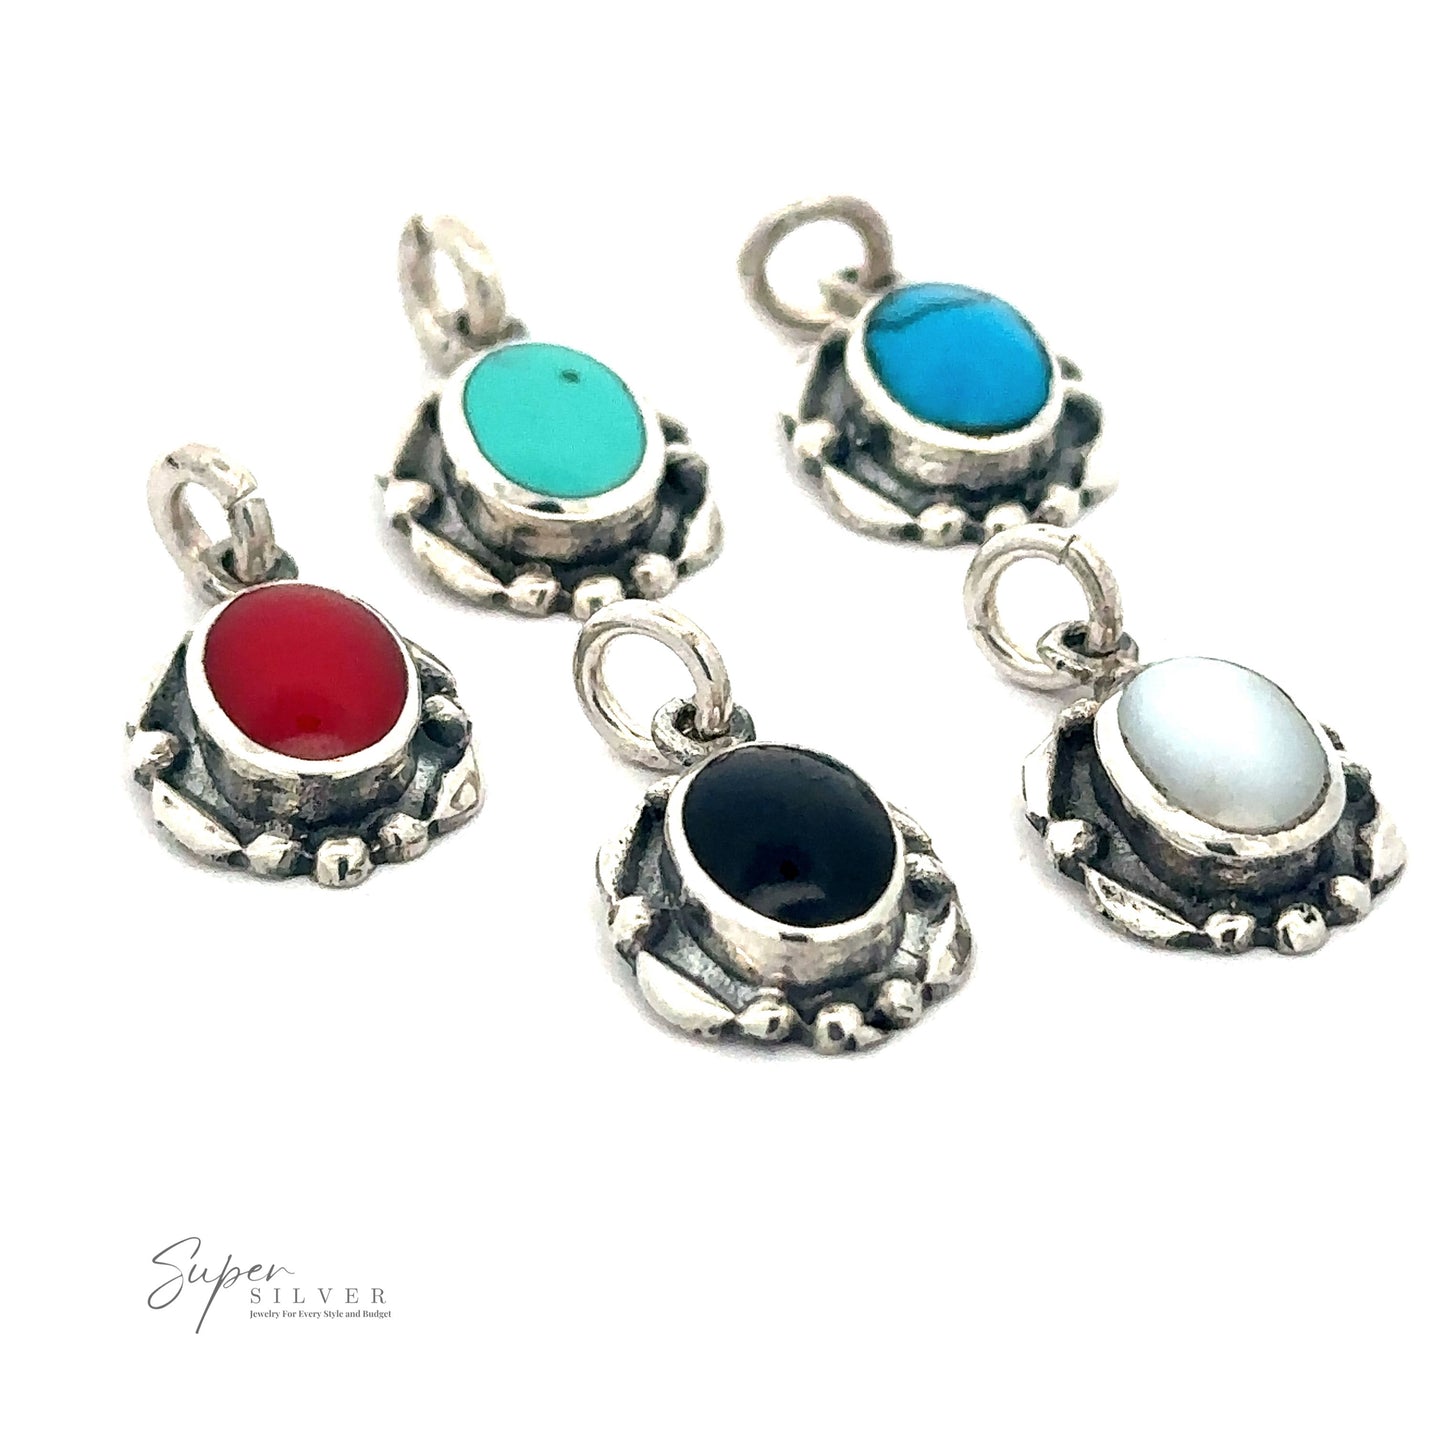 
                  
                    Five Beautiful Oval Stone Pendants With Silver Border with oval-shaped gemstones in various colors: red coral, blue turquoise, deep blue, black, and white, arranged against a white background.
                  
                